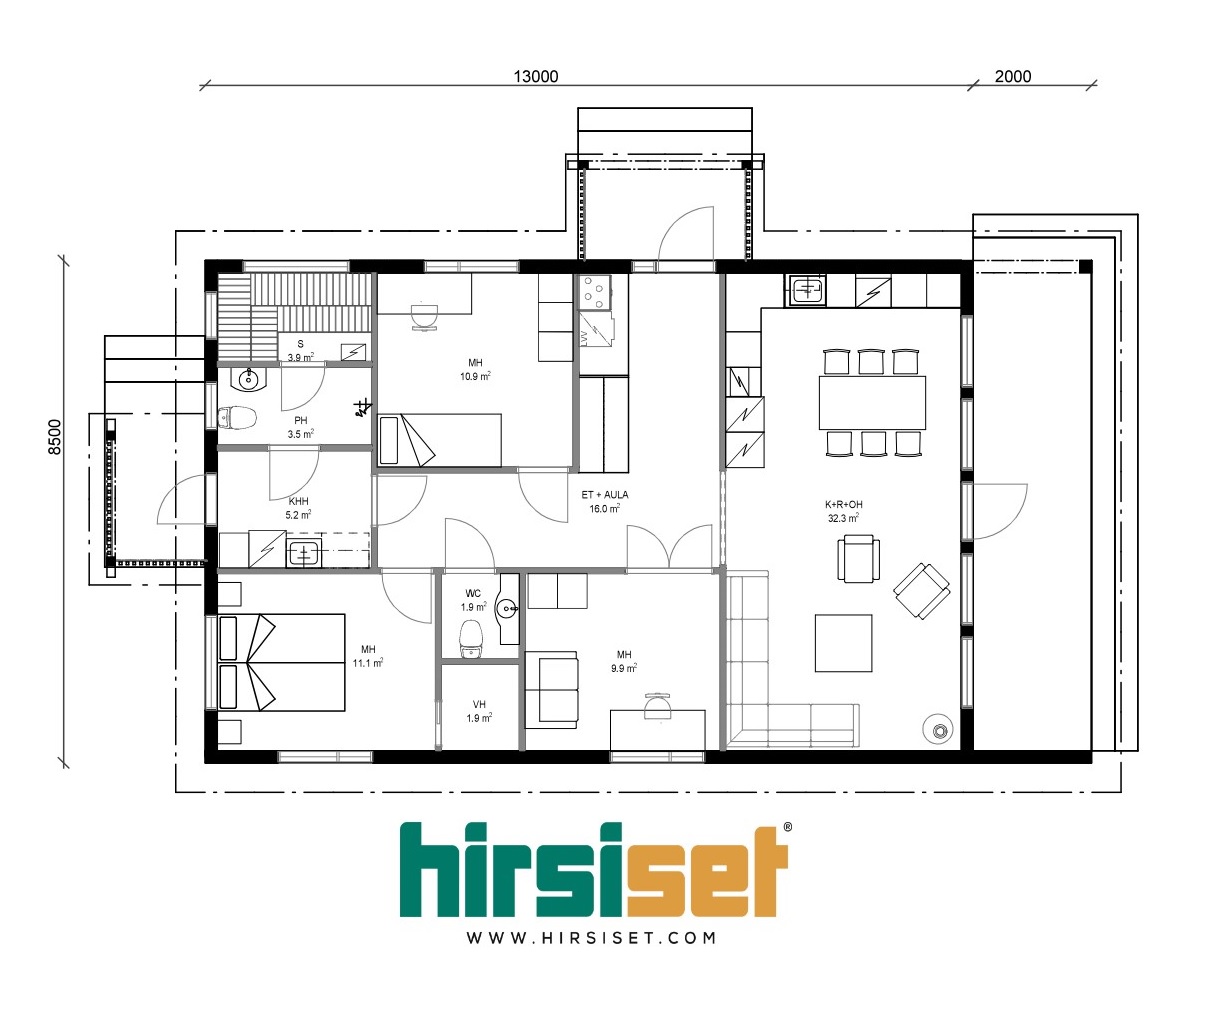 Hirsiset new collection bright log houses Valo floor plan